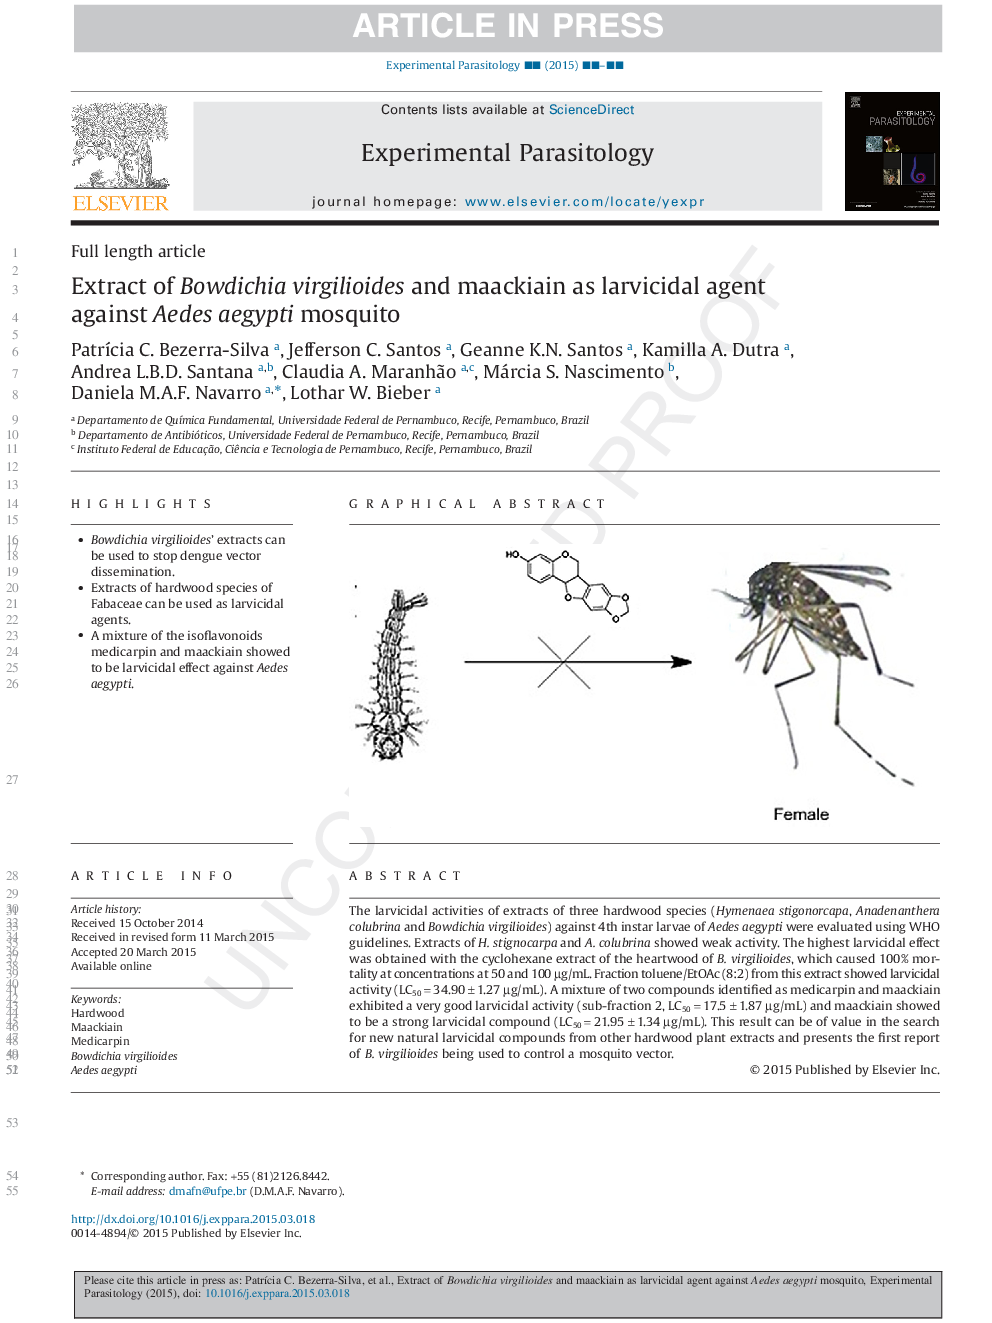 Extract of Bowdichia virgilioides and maackiain as larvicidal agent against Aedes aegypti mosquito